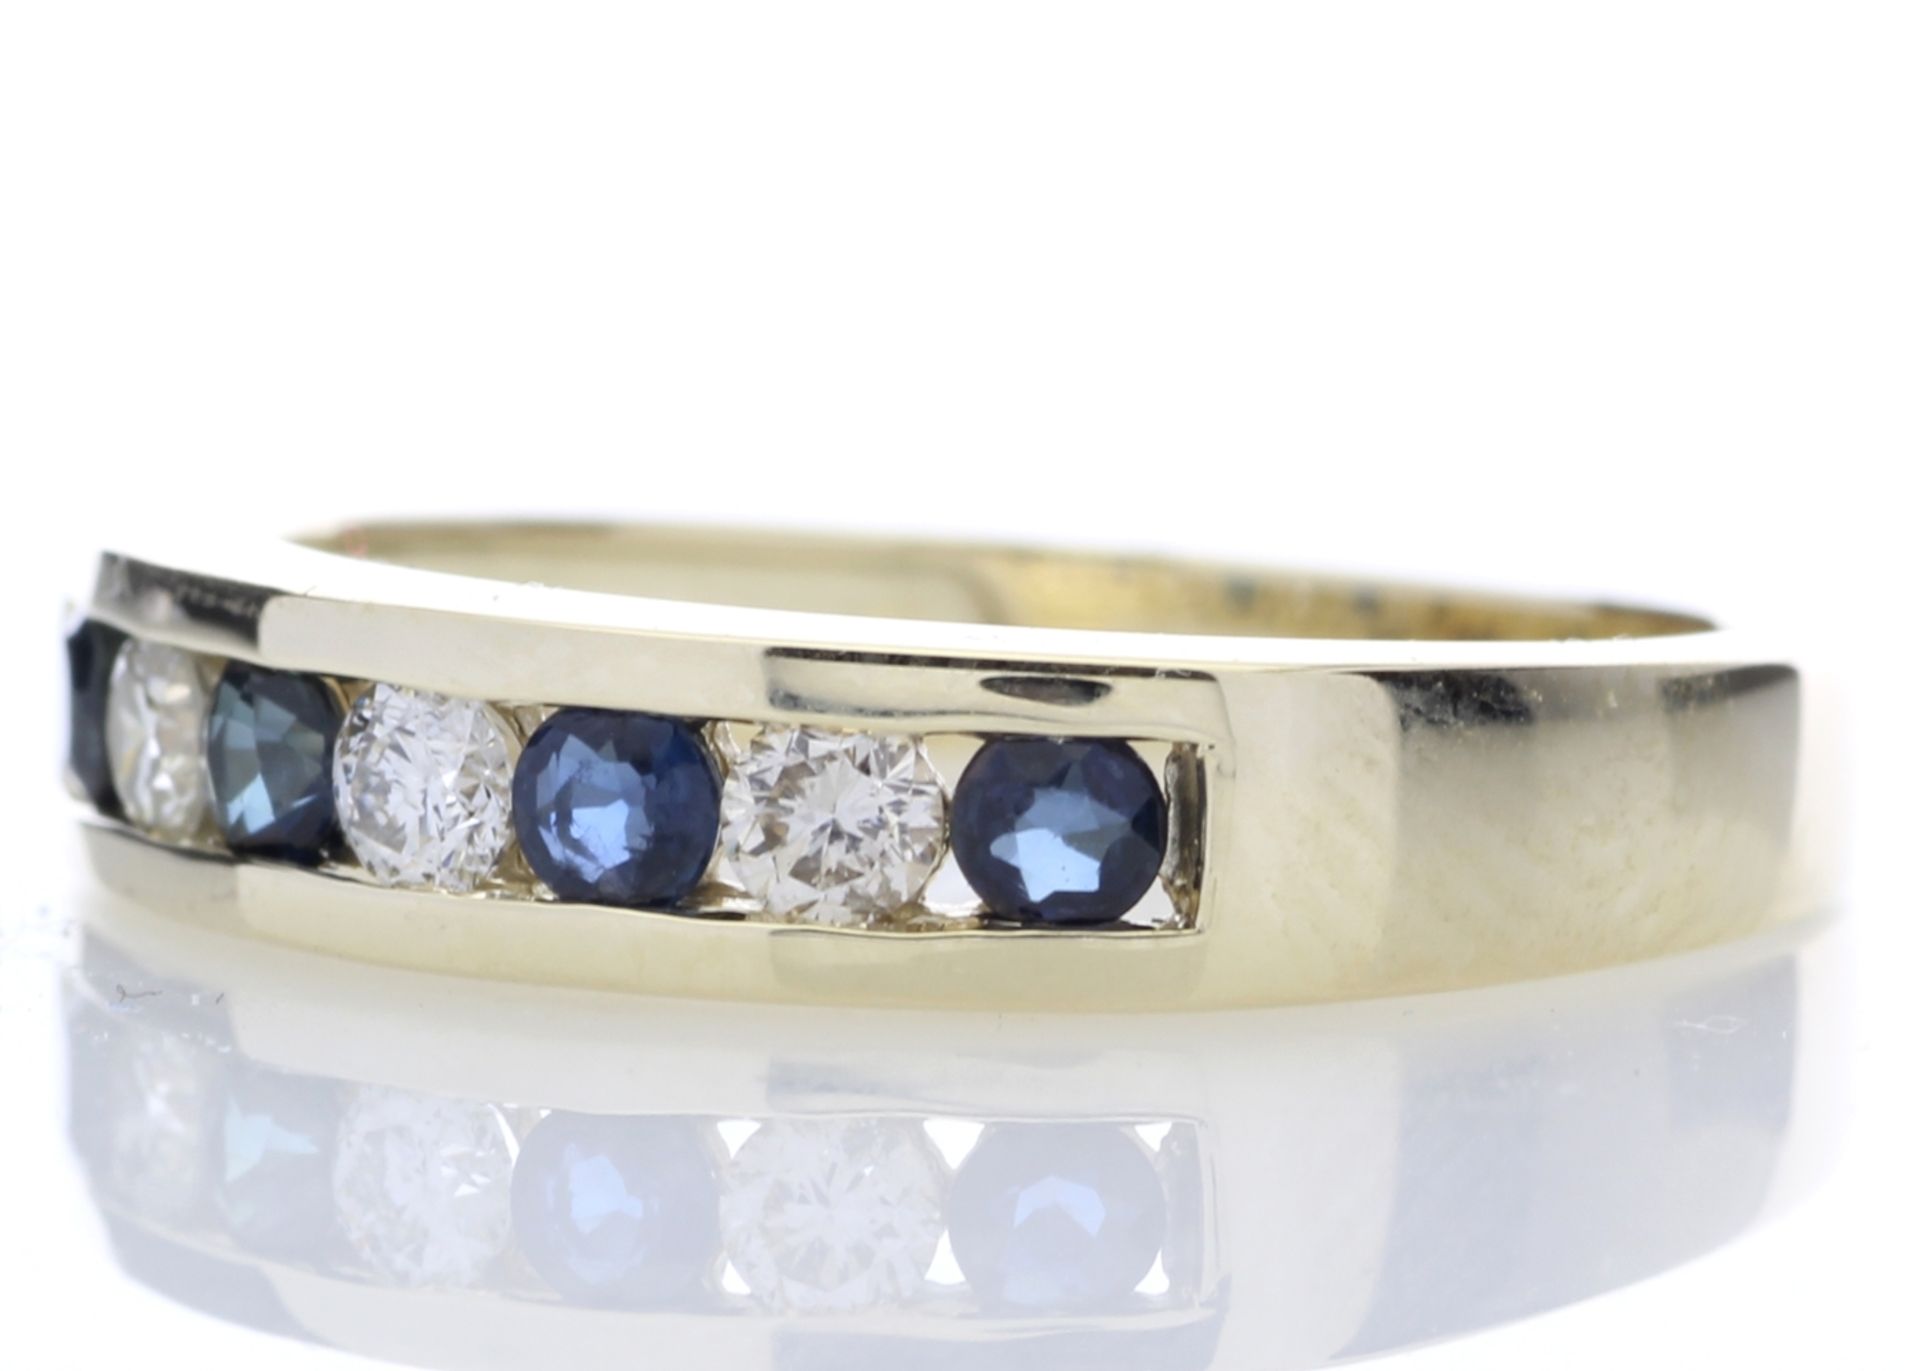 9ct Yellow Gold Channel Set Semi Eternity Diamond Ring 0.25 (Sapphire) Carats - Valued by GIE £2, - Image 2 of 5